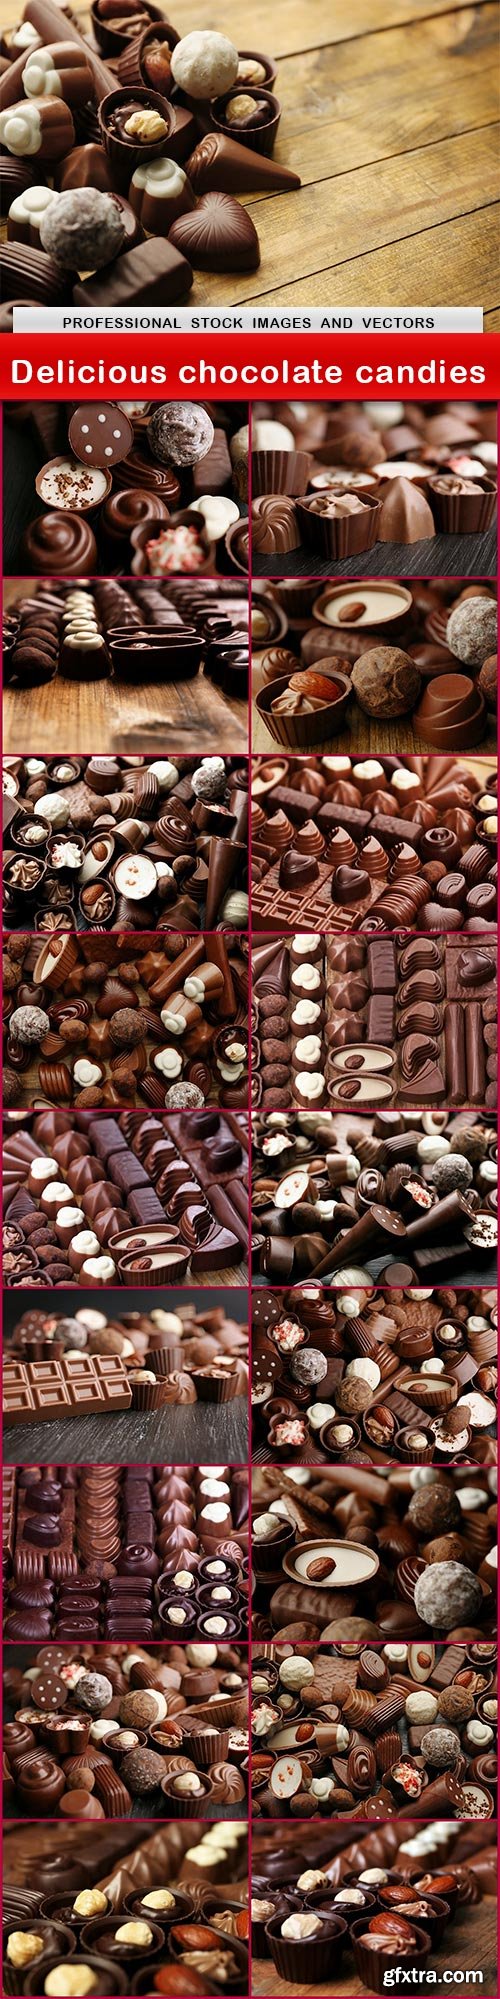 Delicious chocolate candies - 19 UHQ JPEG